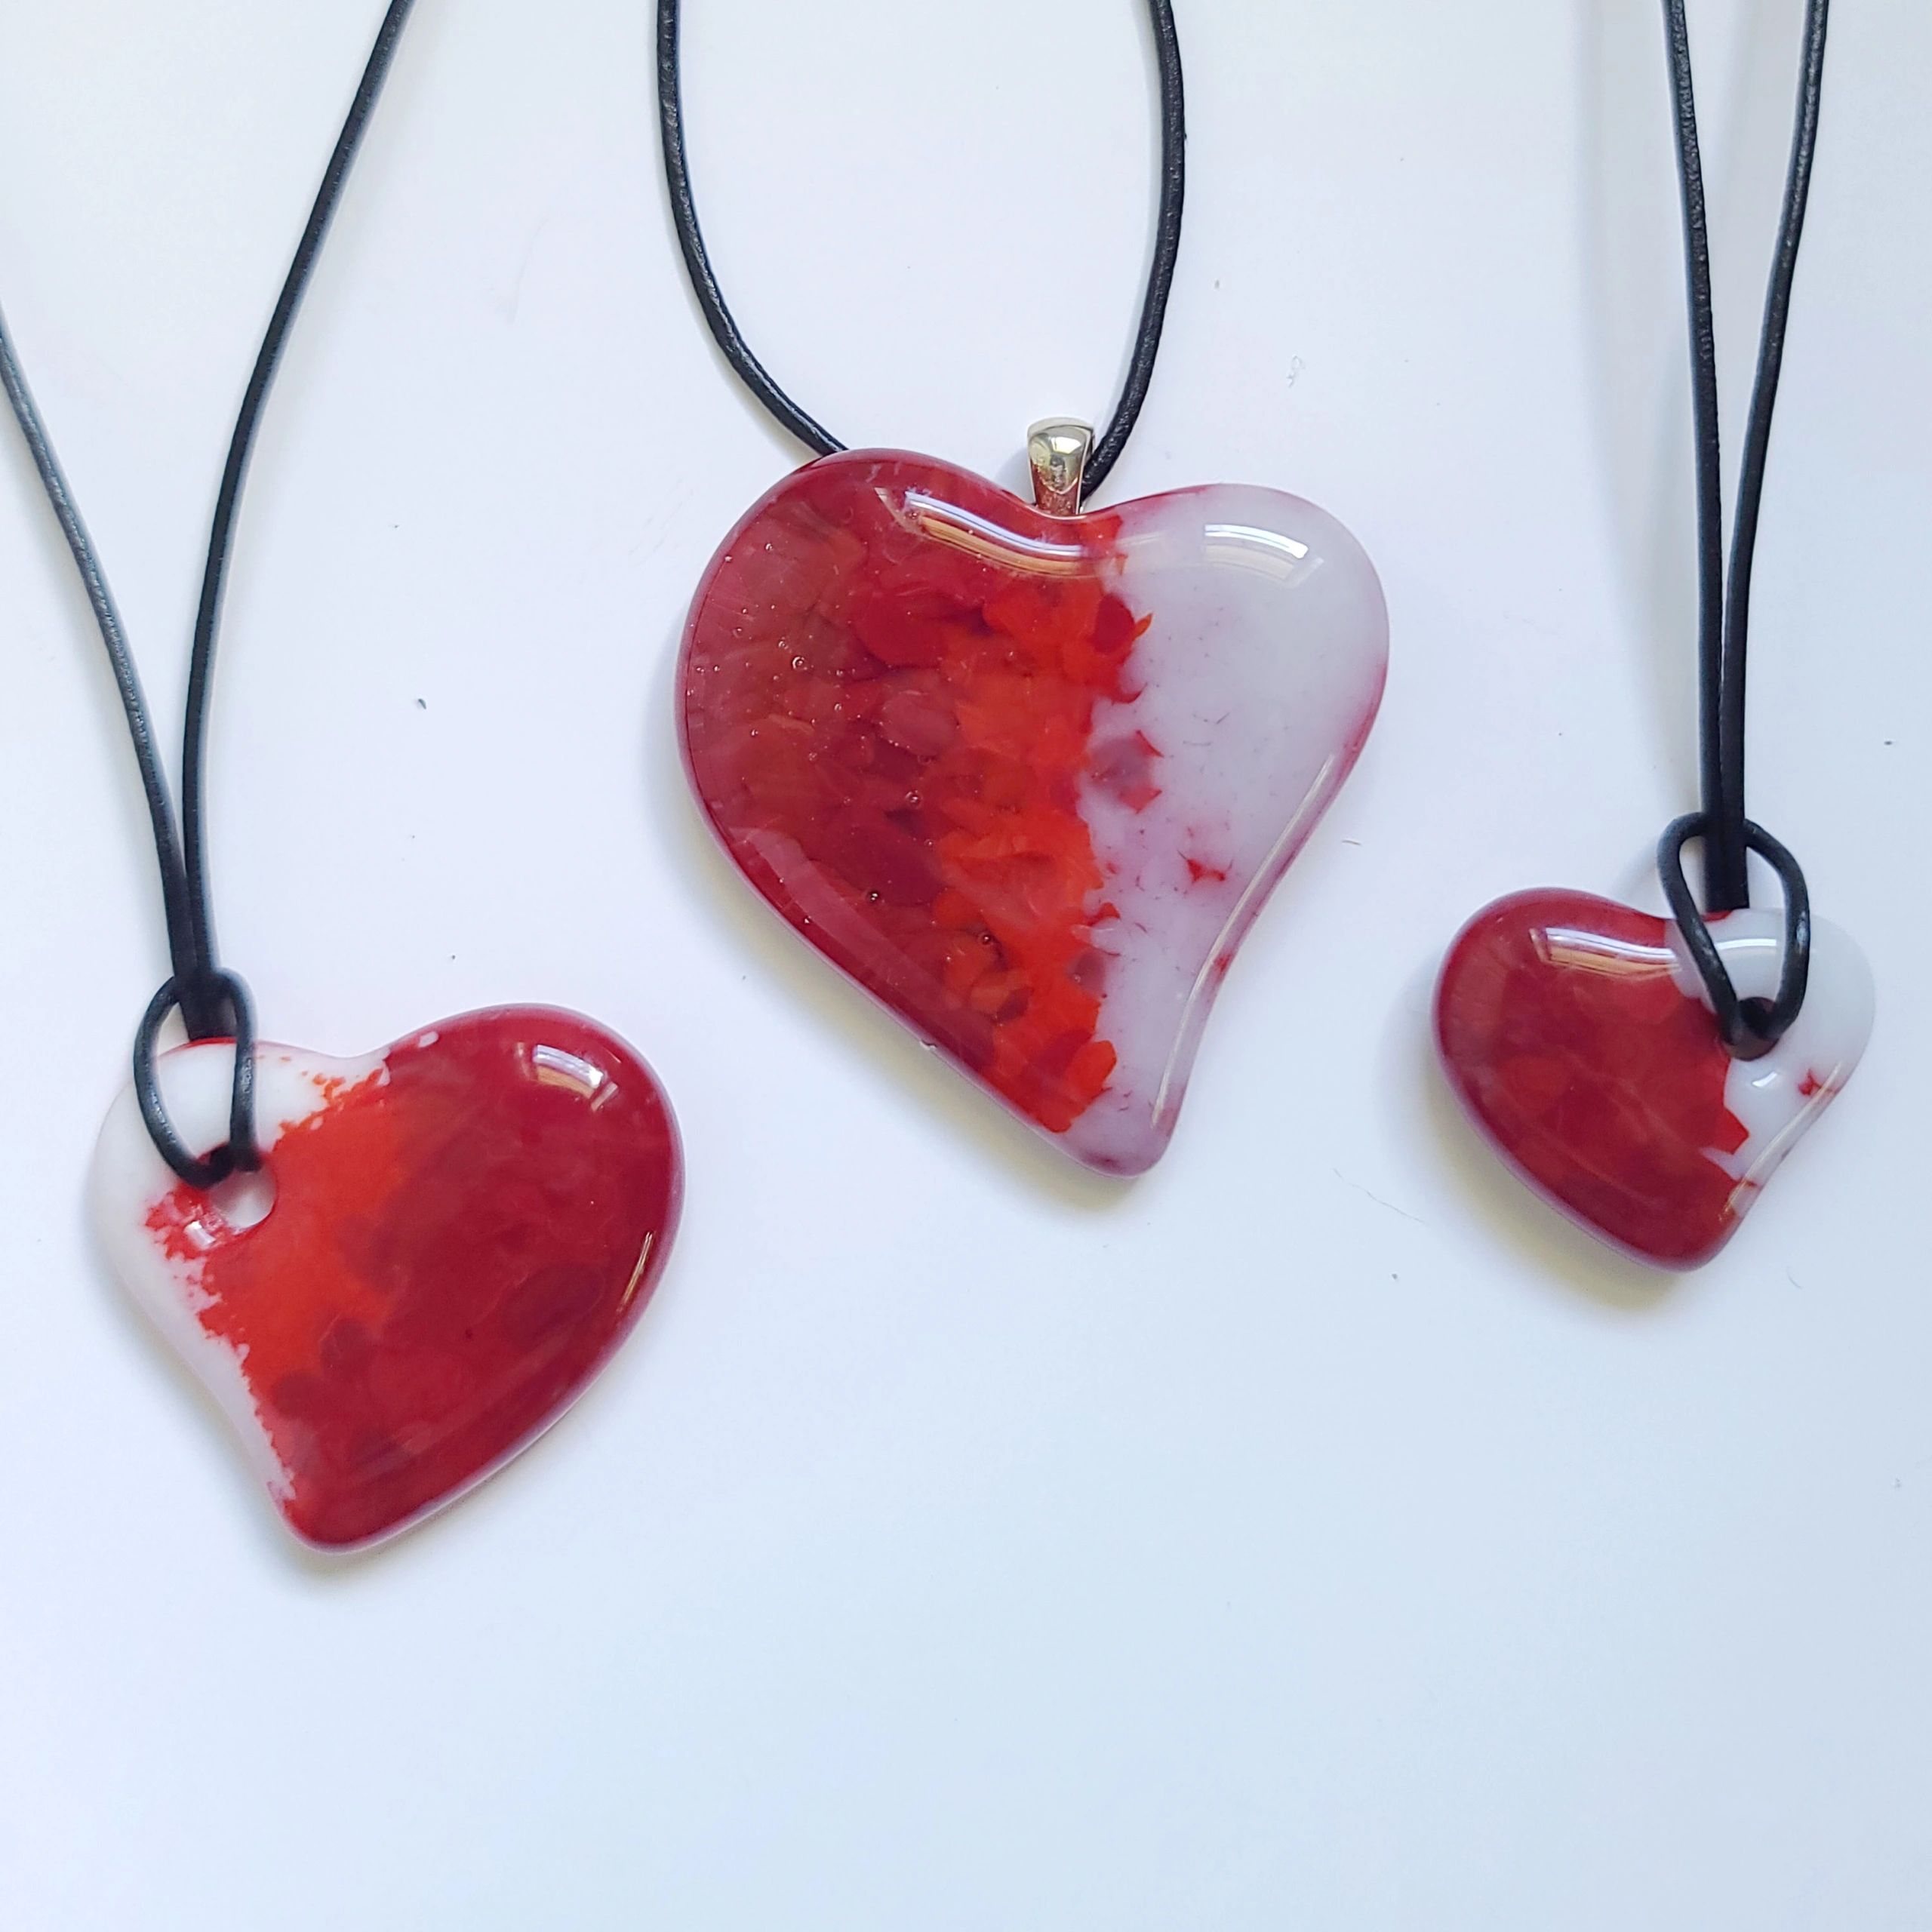 Glass Heart Necklaces
Perfect for Valentine's Day or any time you want to share a little love!